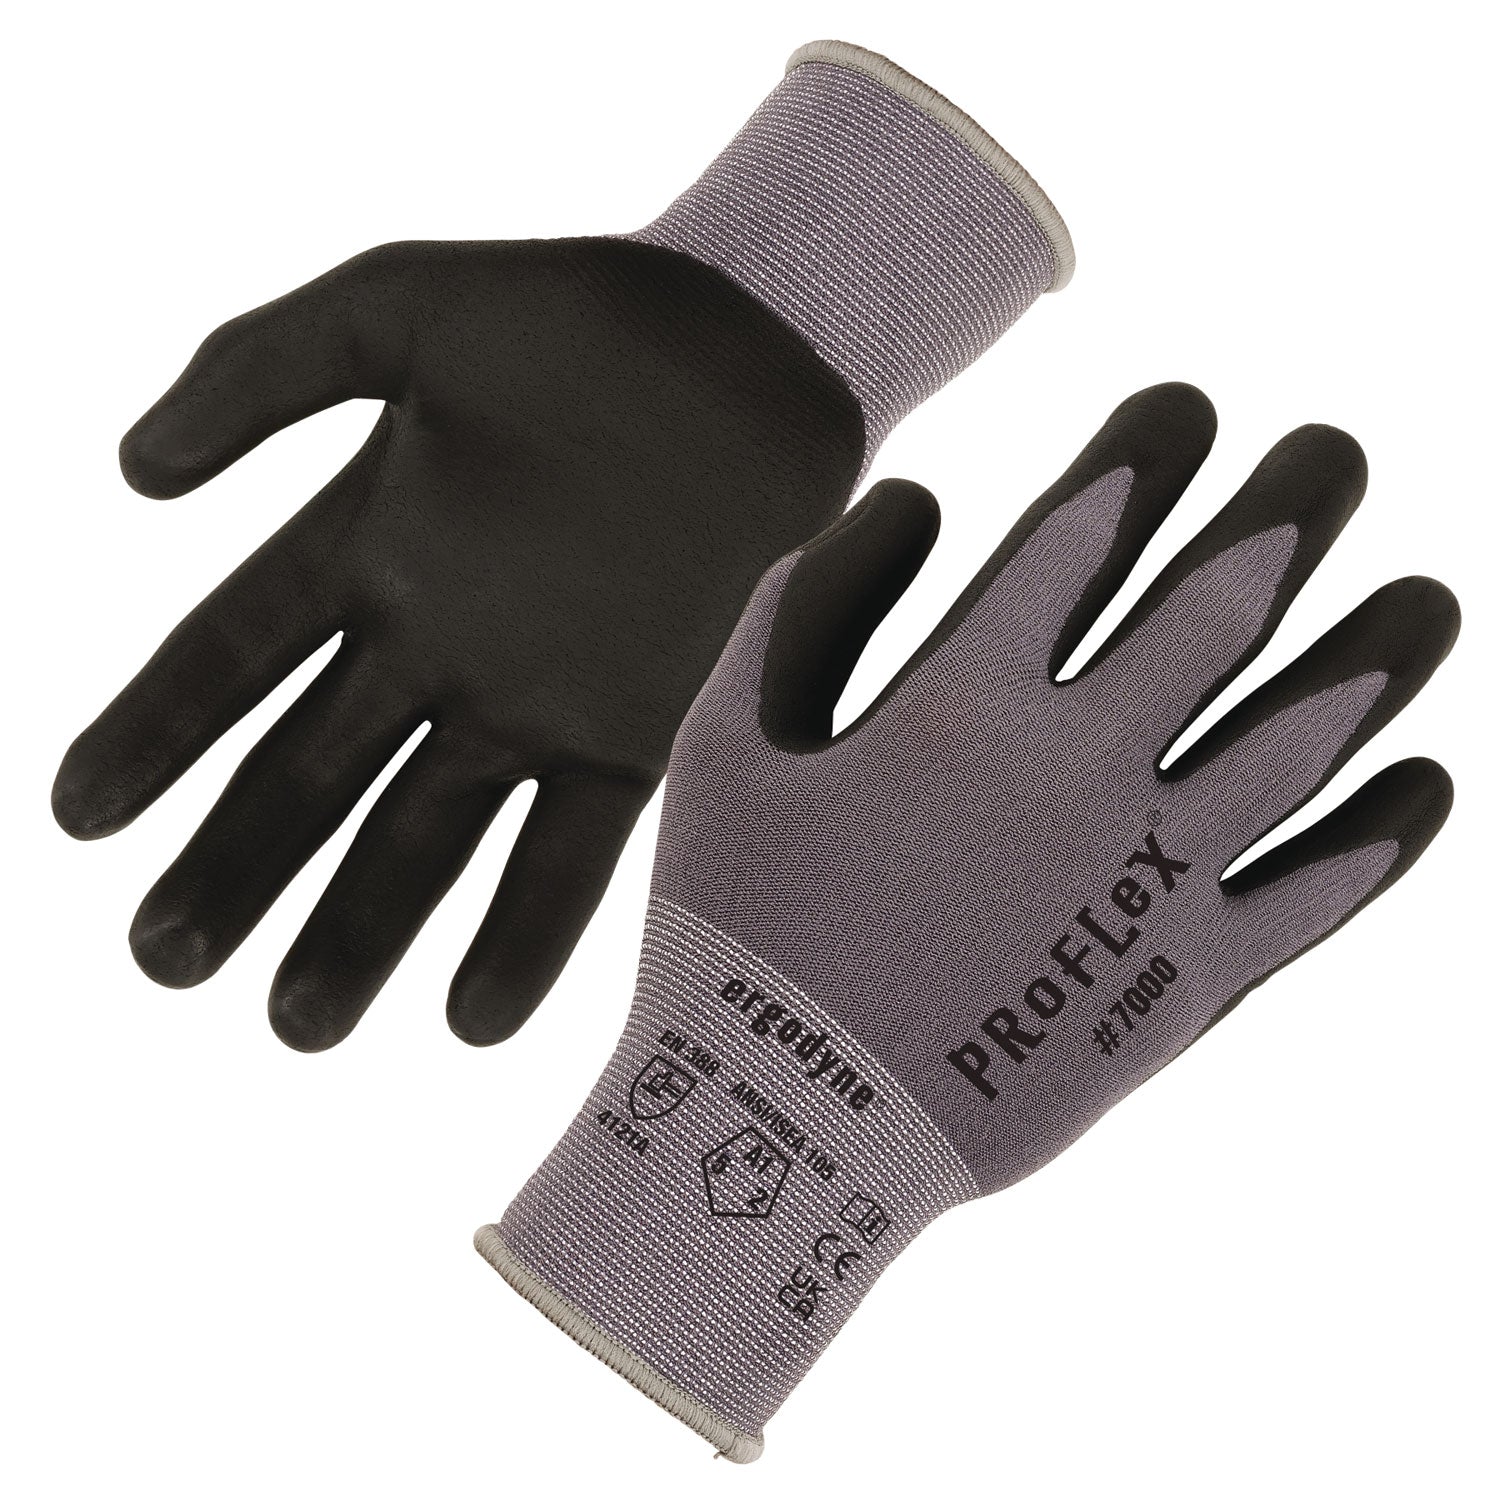 proflex-7000-nitrile-coated-gloves-microfoam-palm-gray-x-small-12-pairs-pack-ships-in-1-3-business-days_ego10361 - 1